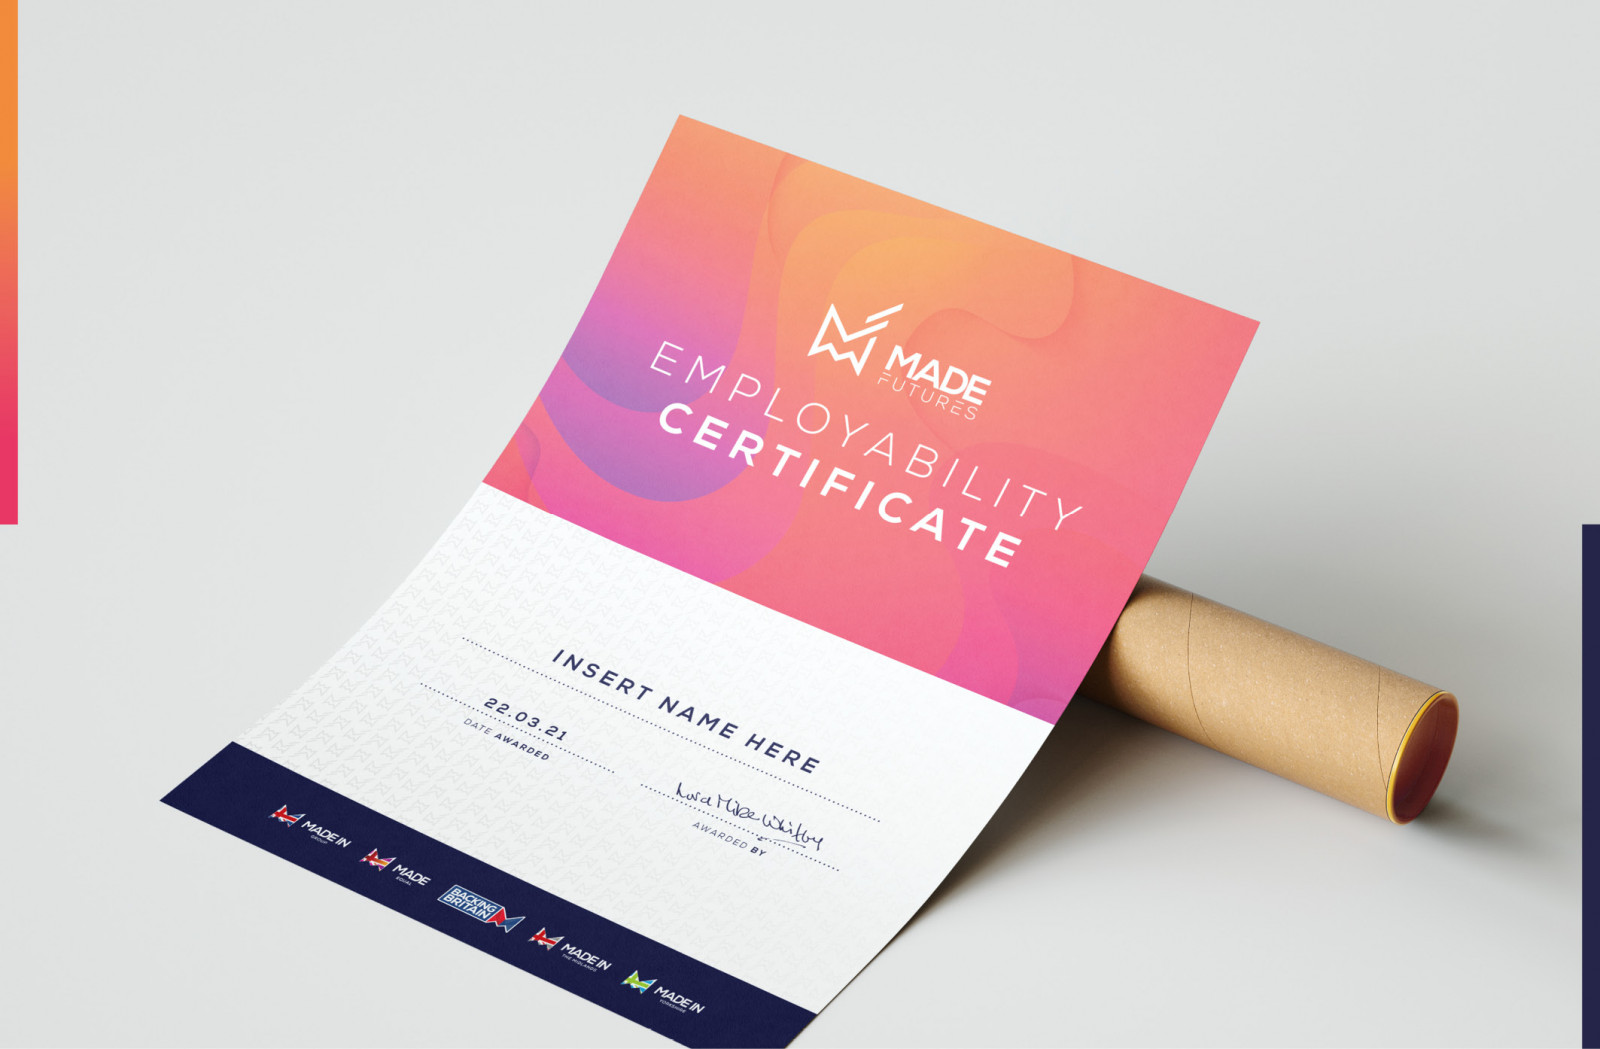 Made Futures “Employability Certificate” Launched  to Support Job Seekers